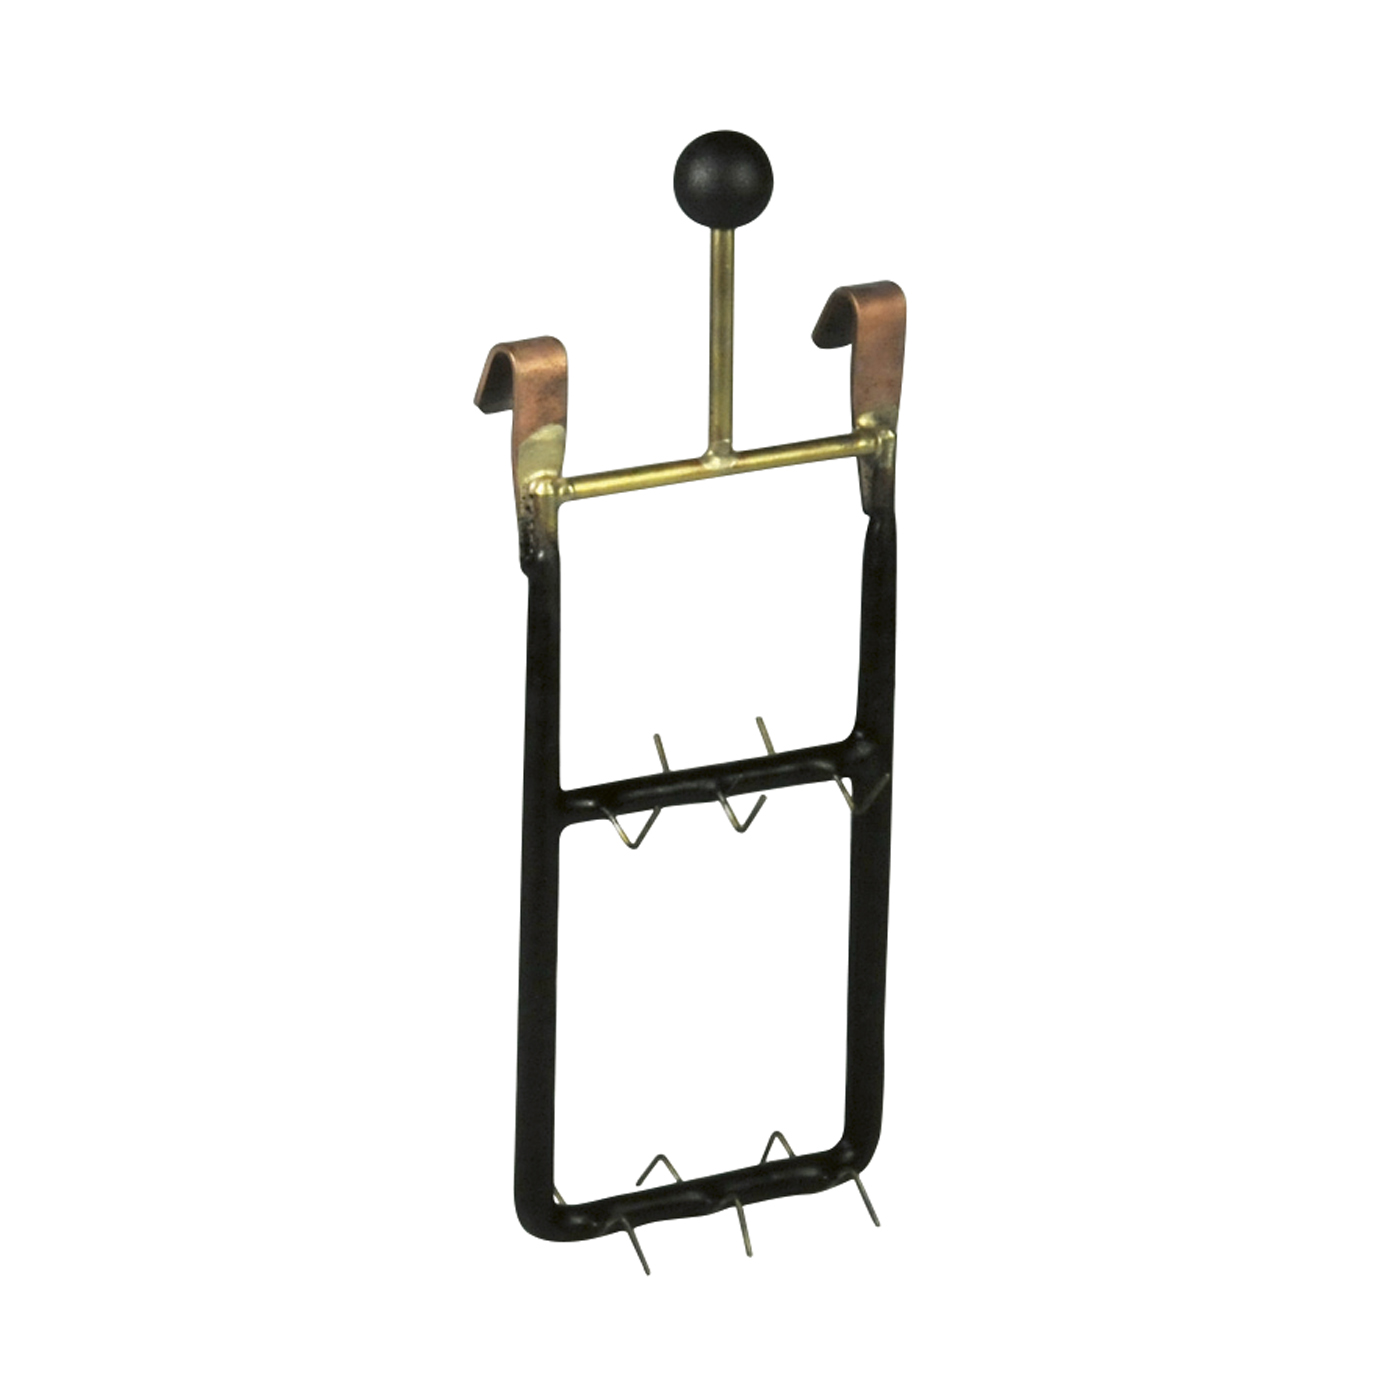 Display Rack for Chains, 12 Hooks - 1 piece